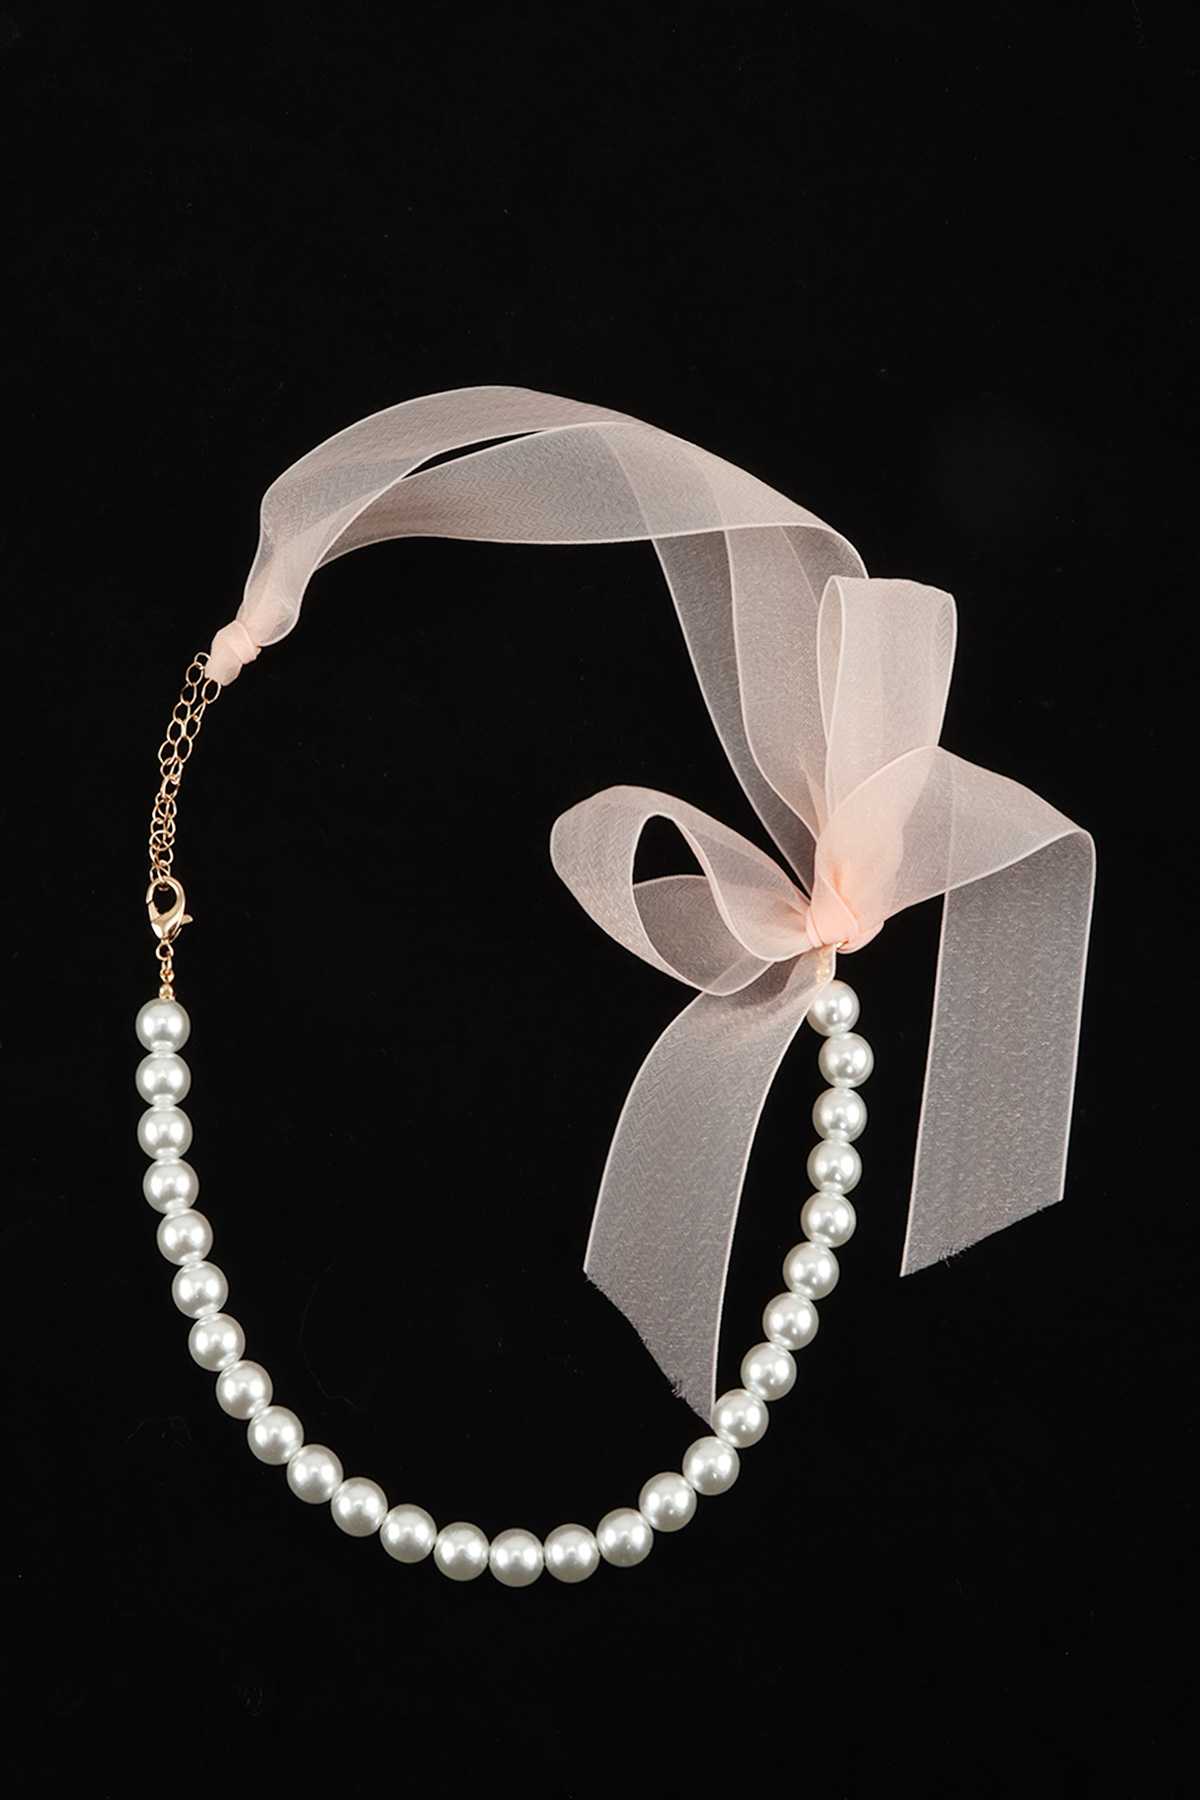 Ribbon and Pearl Beaded Chain Necklace